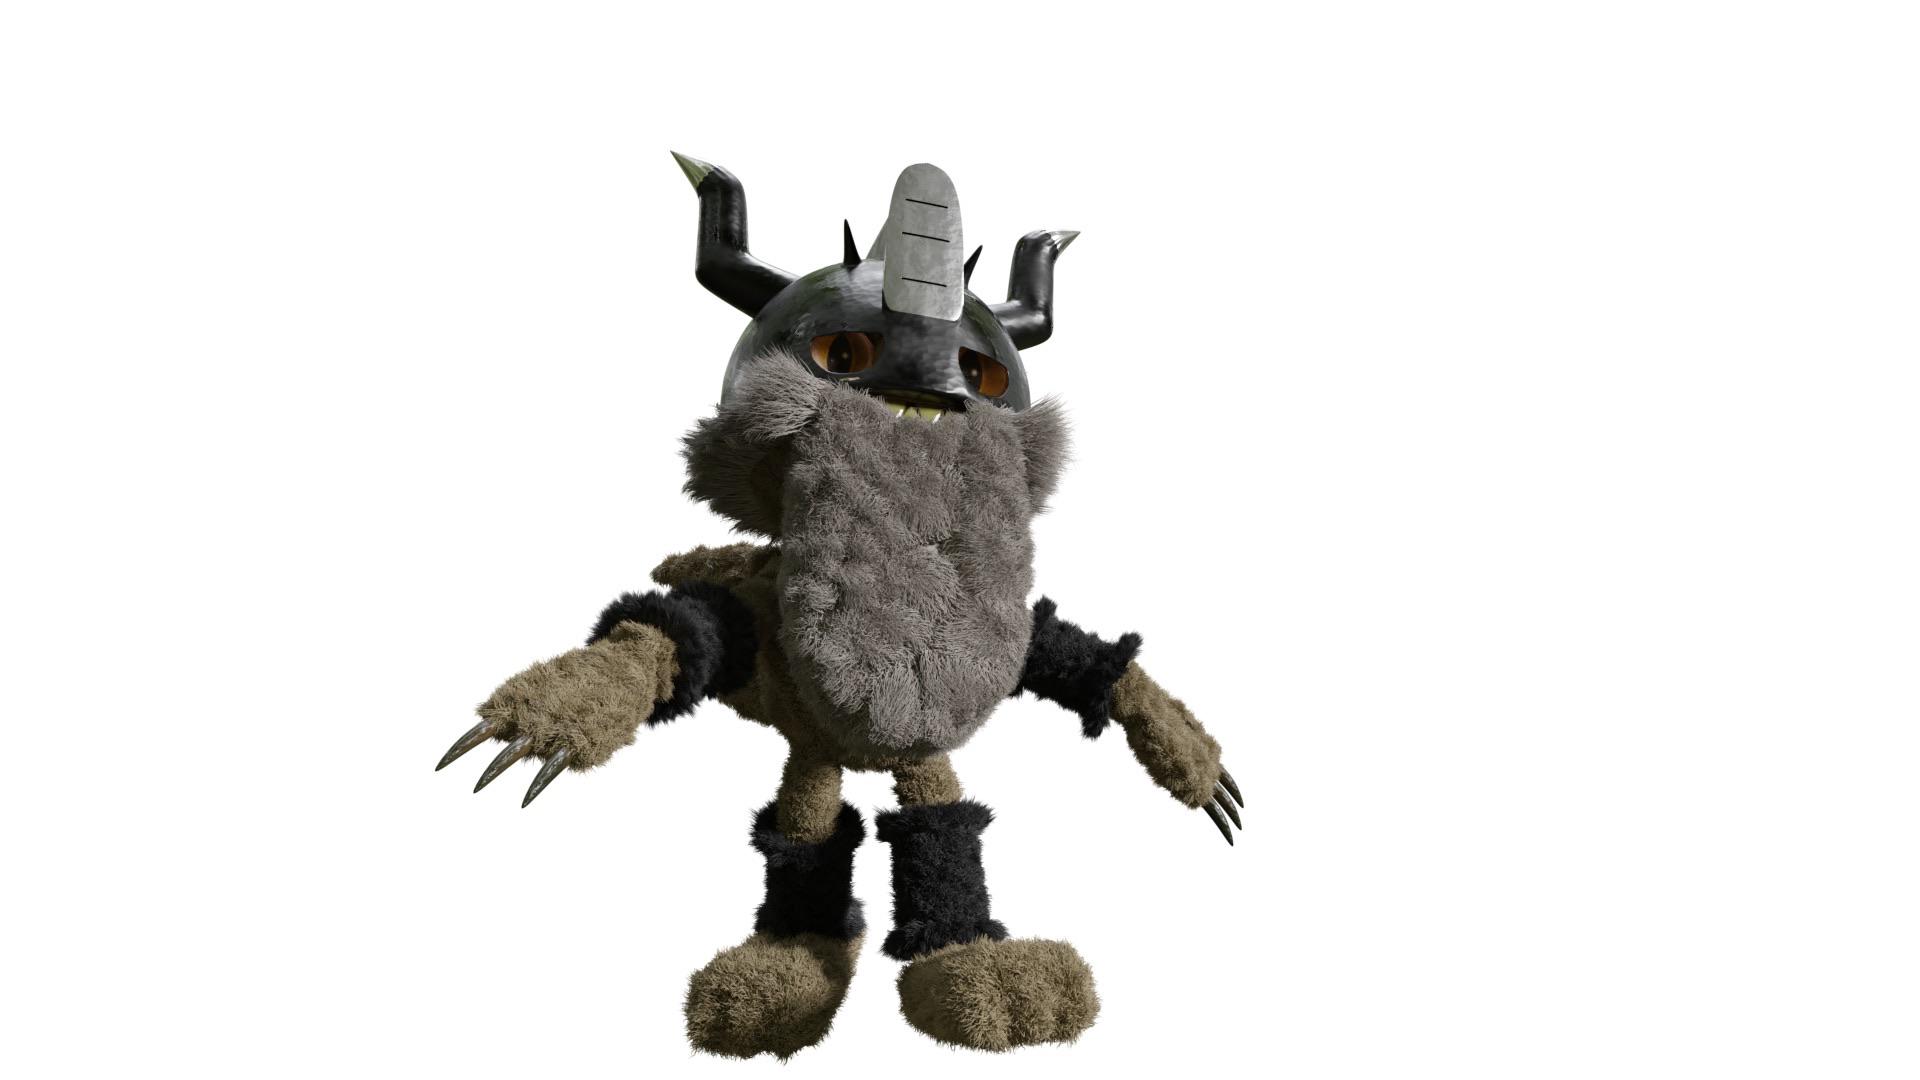 I made a realistic Perrserker, I'll take requests on which